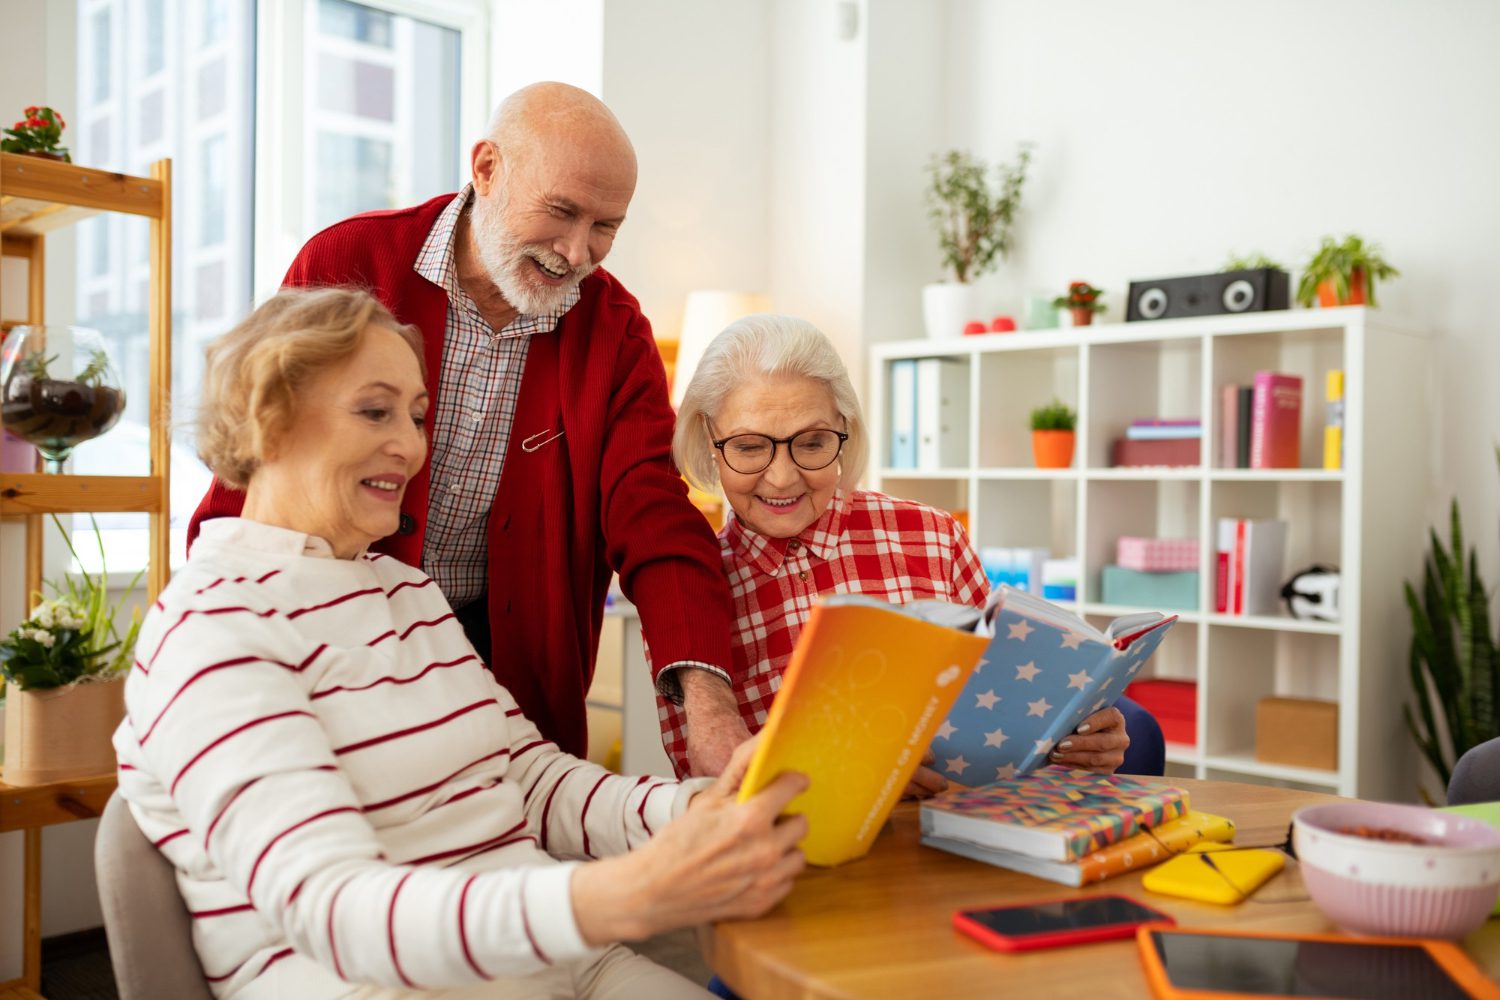 look-here-joyful-senior-women-smiling-while-showing-books-their-friend